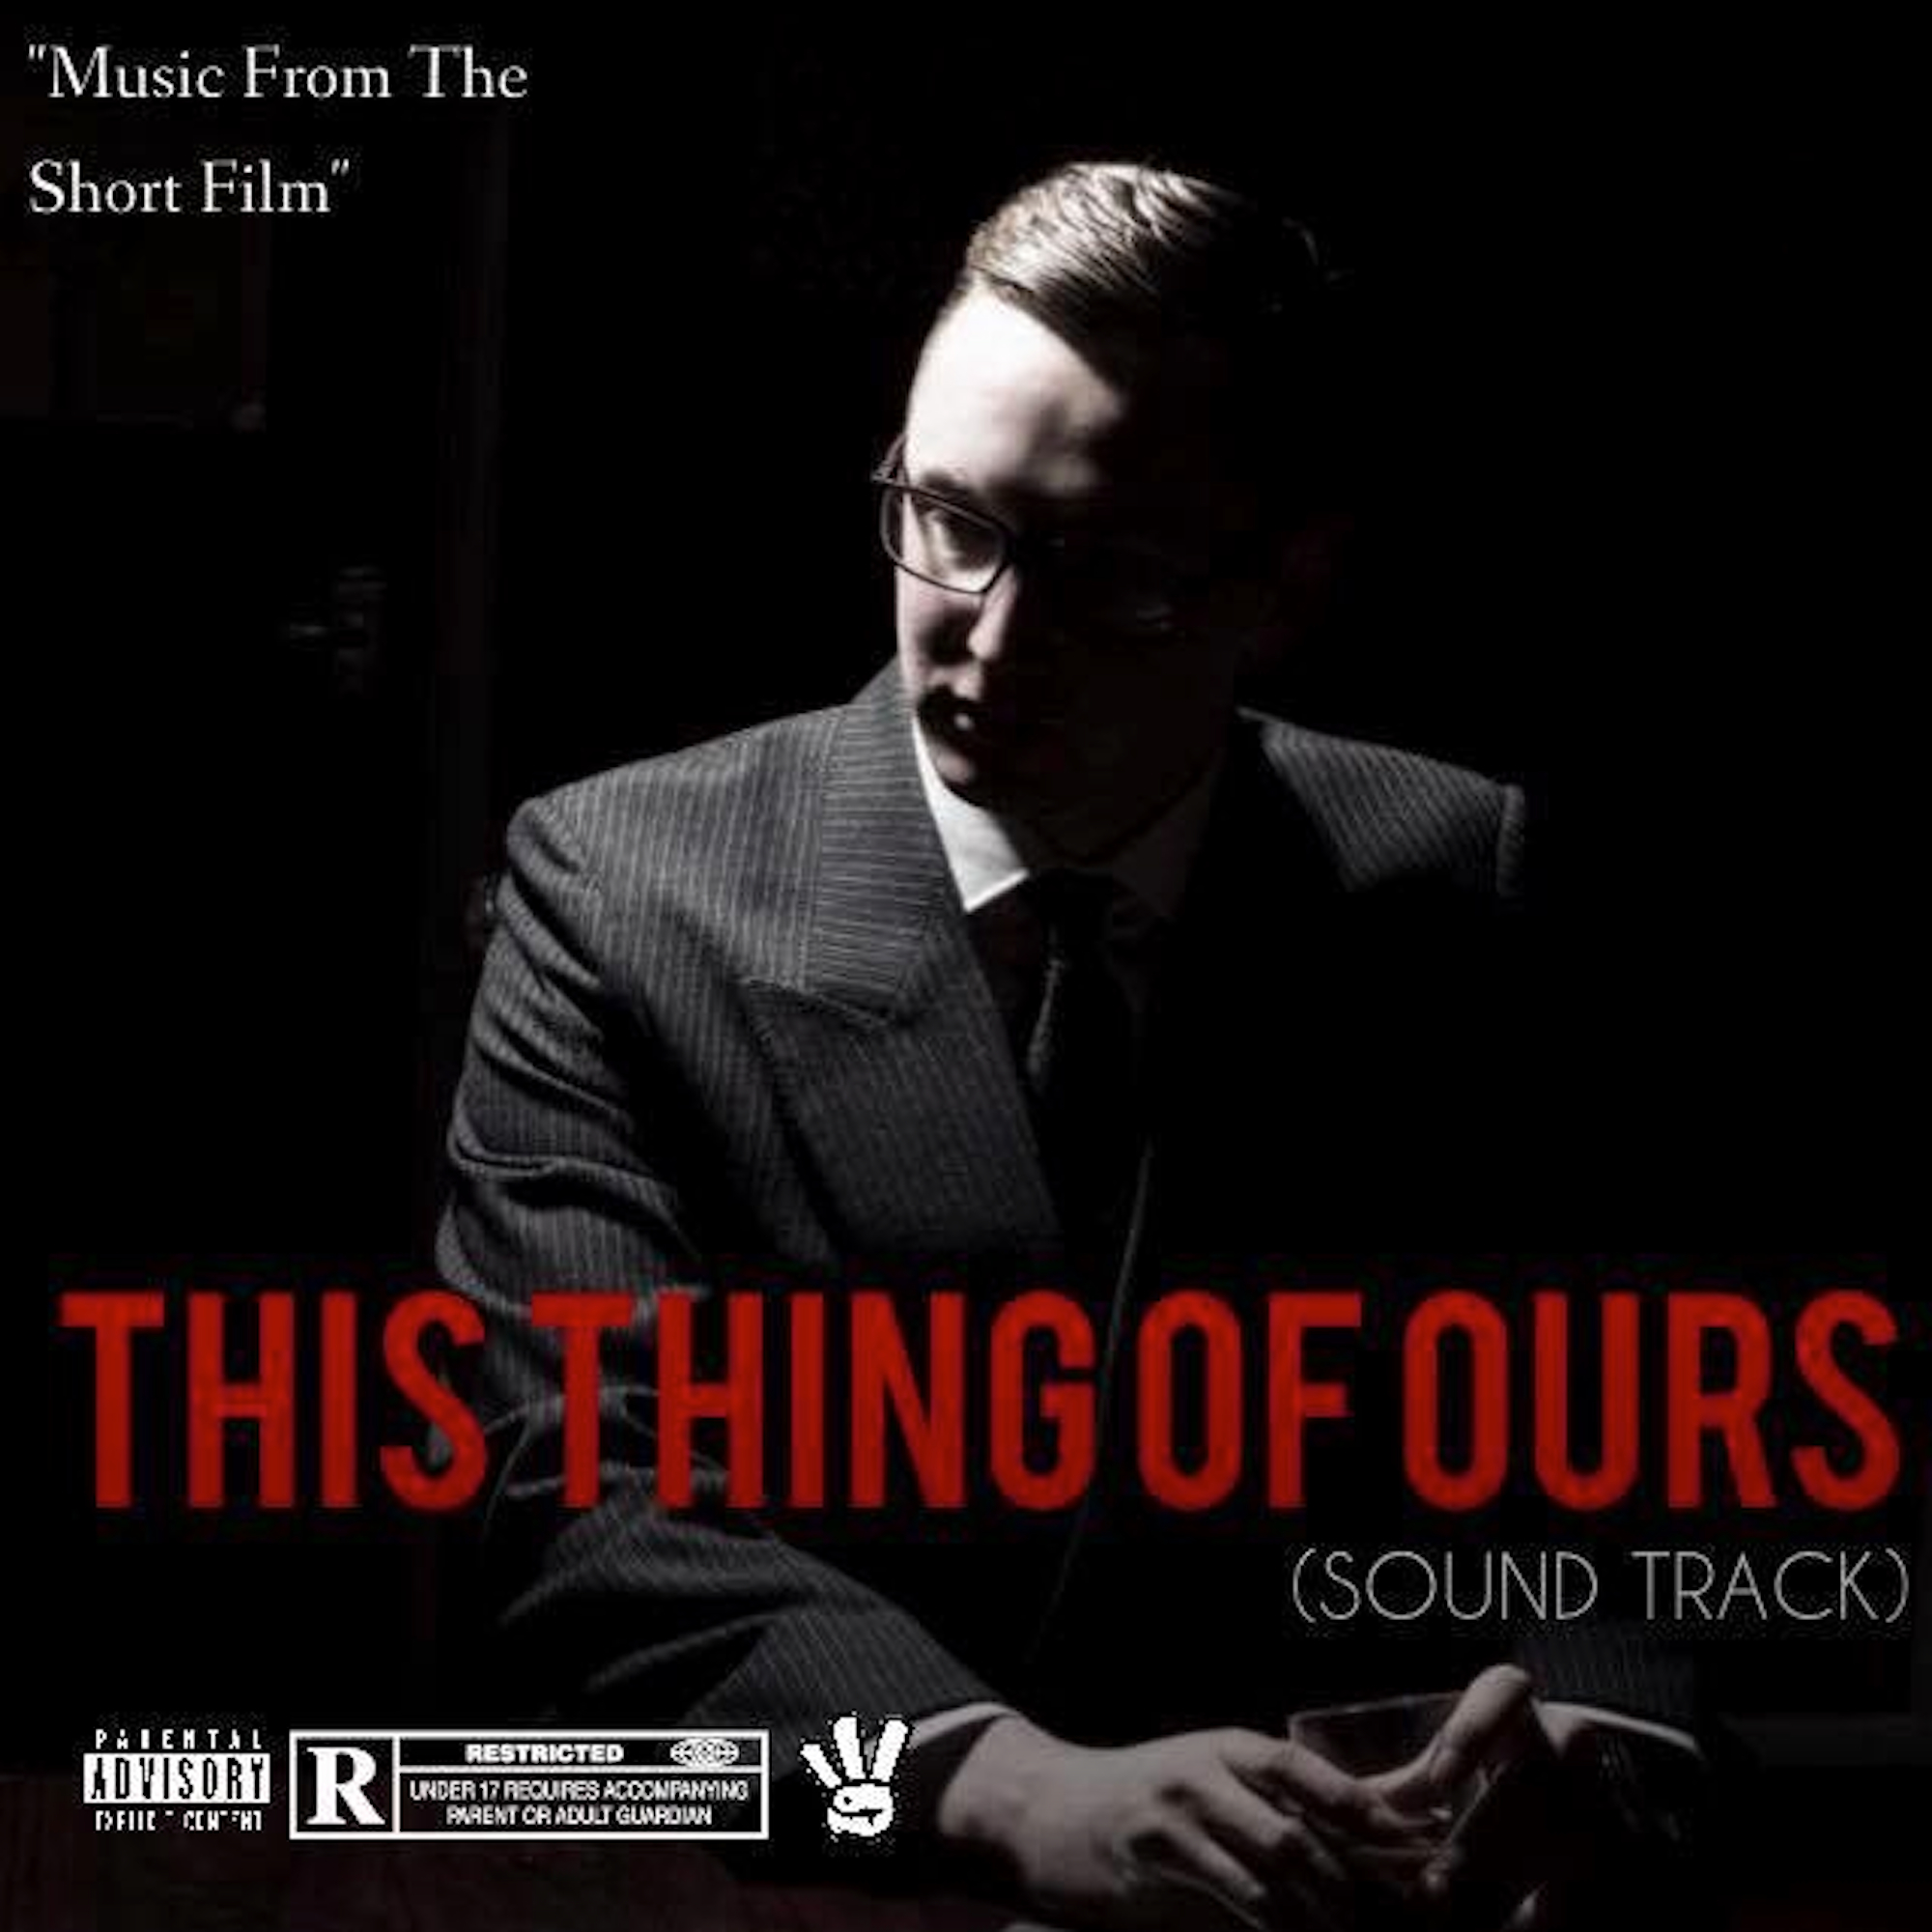 Extra extra Music from Short Film " This Things of Ours